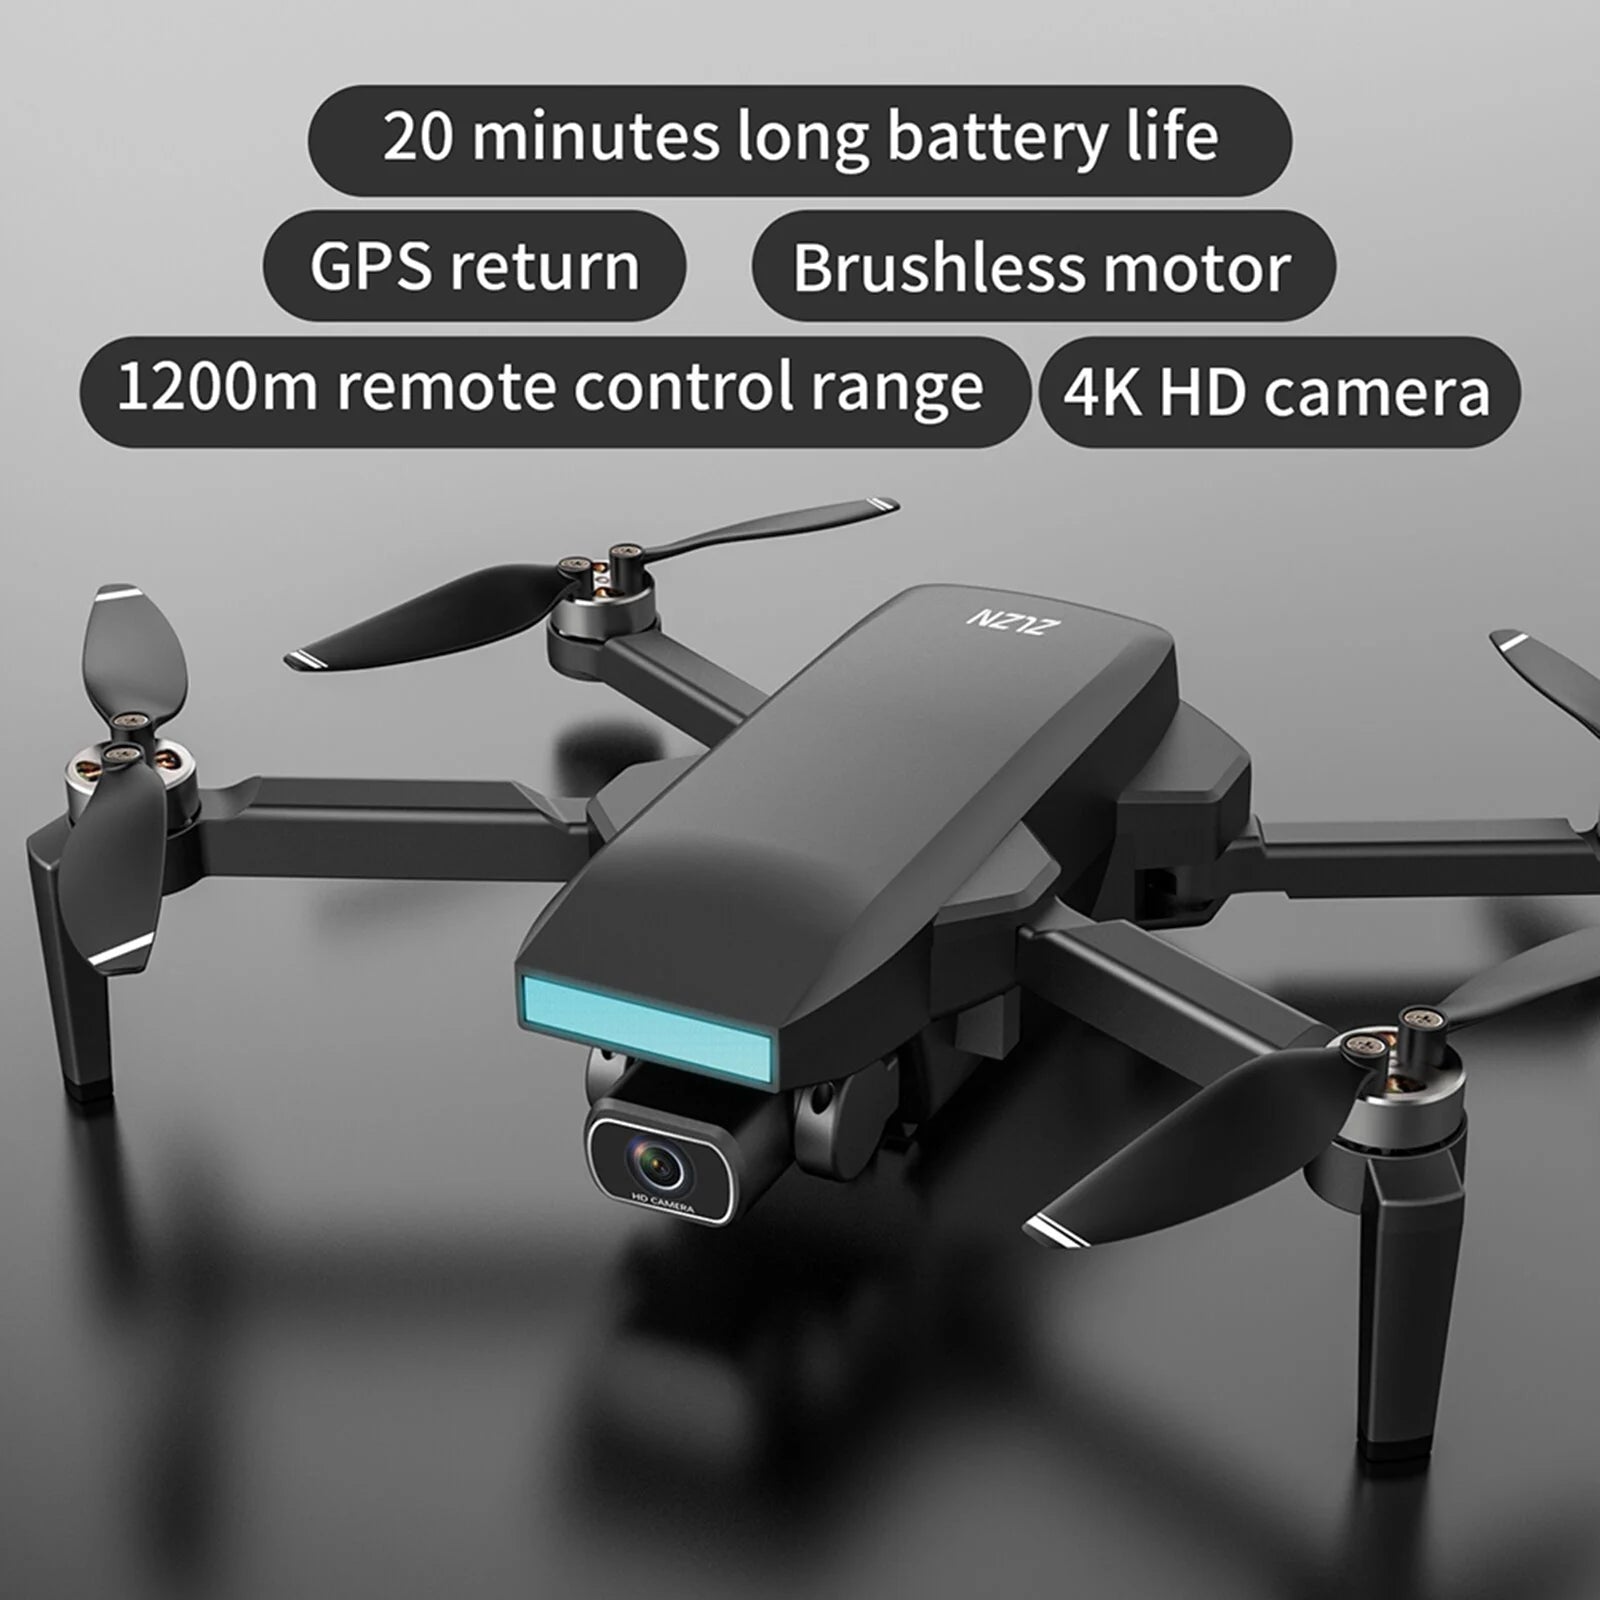 ZLL SG107 Pro Drone, 20 minutes long battery life GPS return Brushless motor 1200m remote